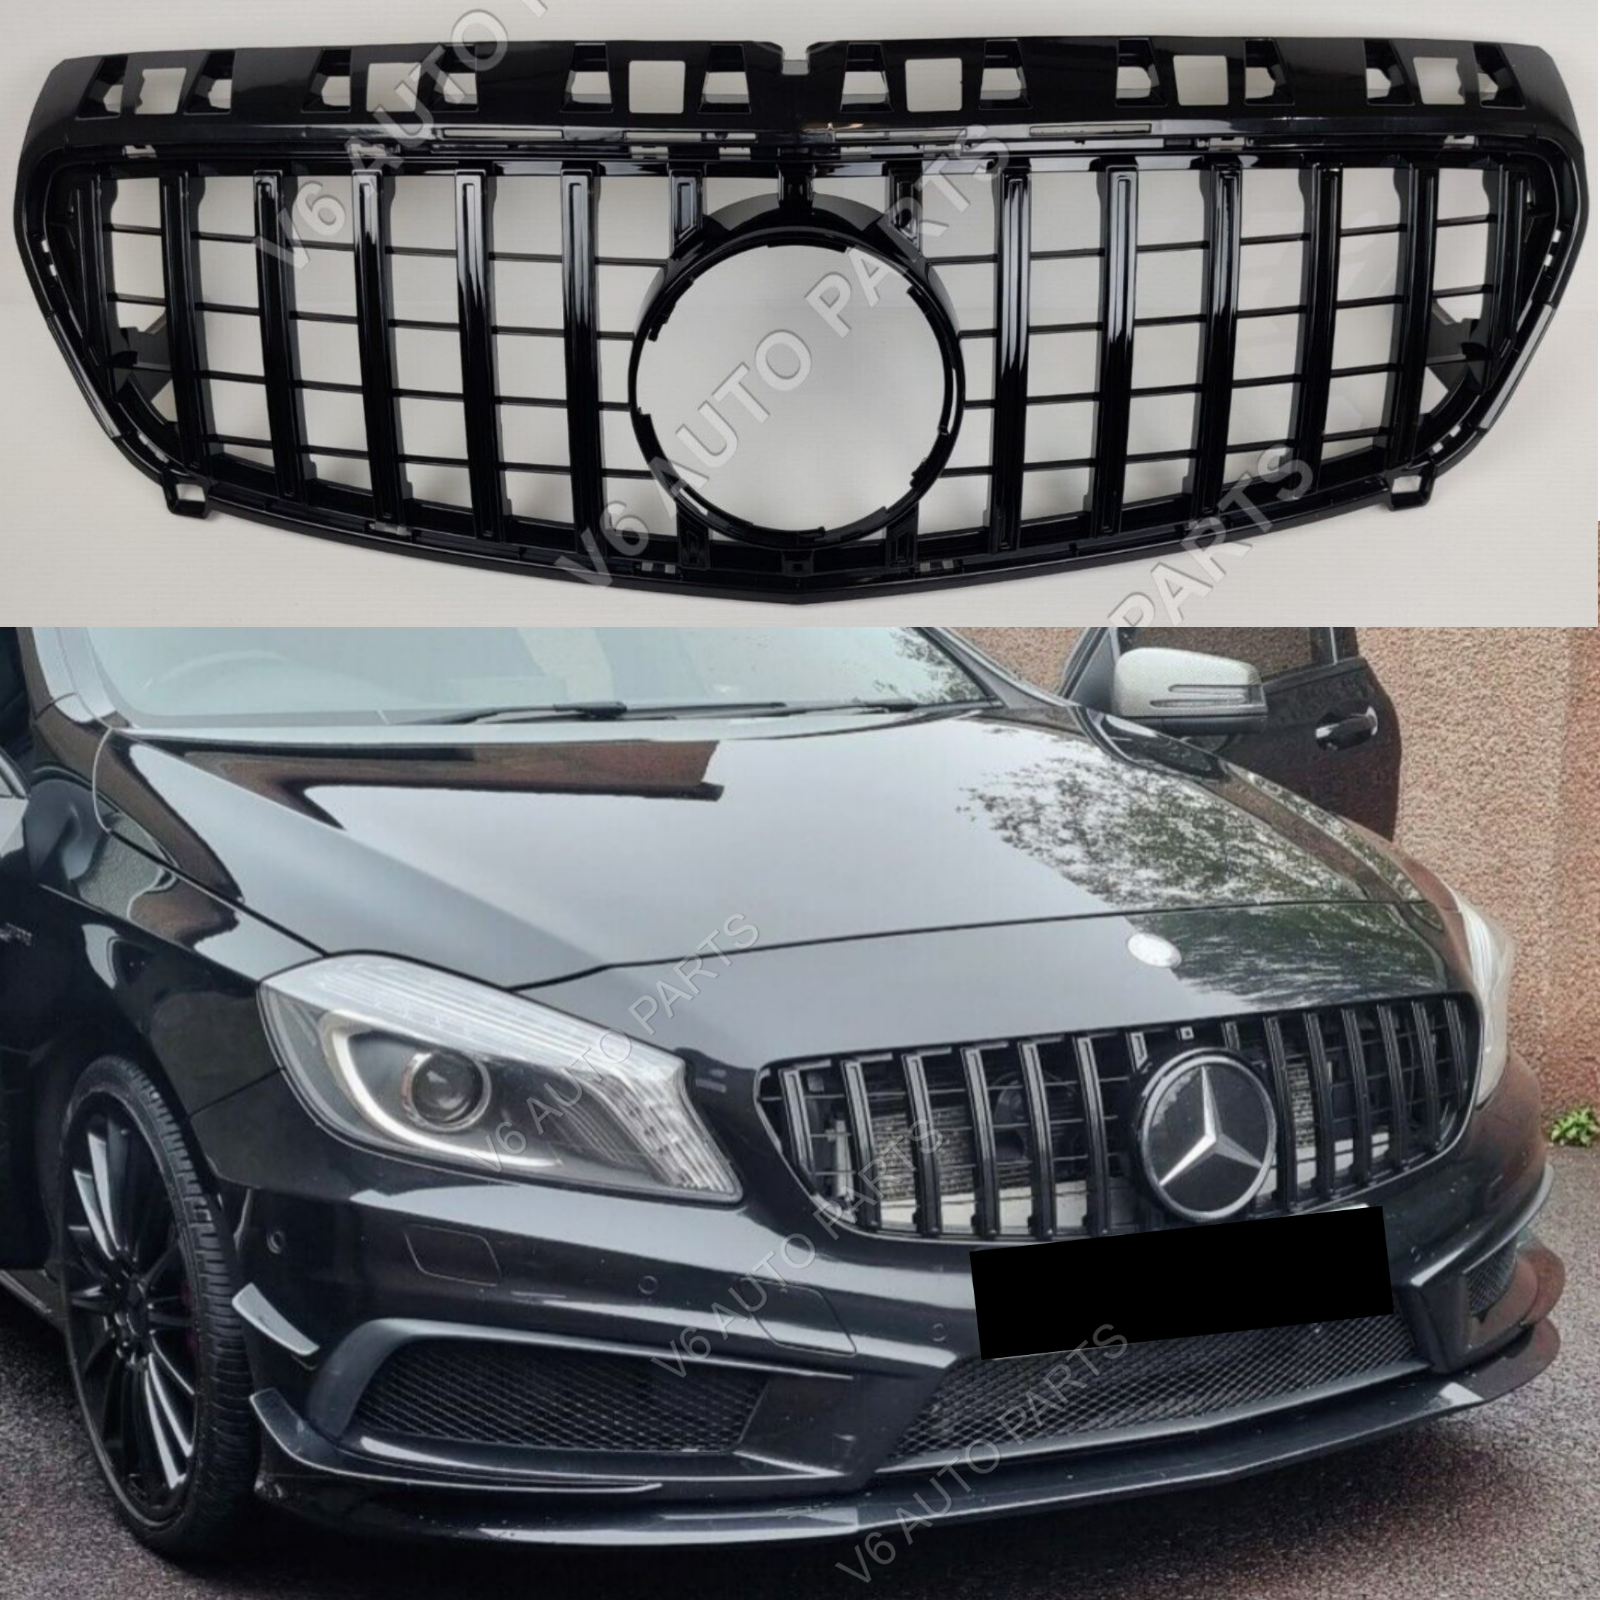 For Mercedes A-Class 2012-2015 W176 A160 A45 250 Front GT Black Grille AMG Sport